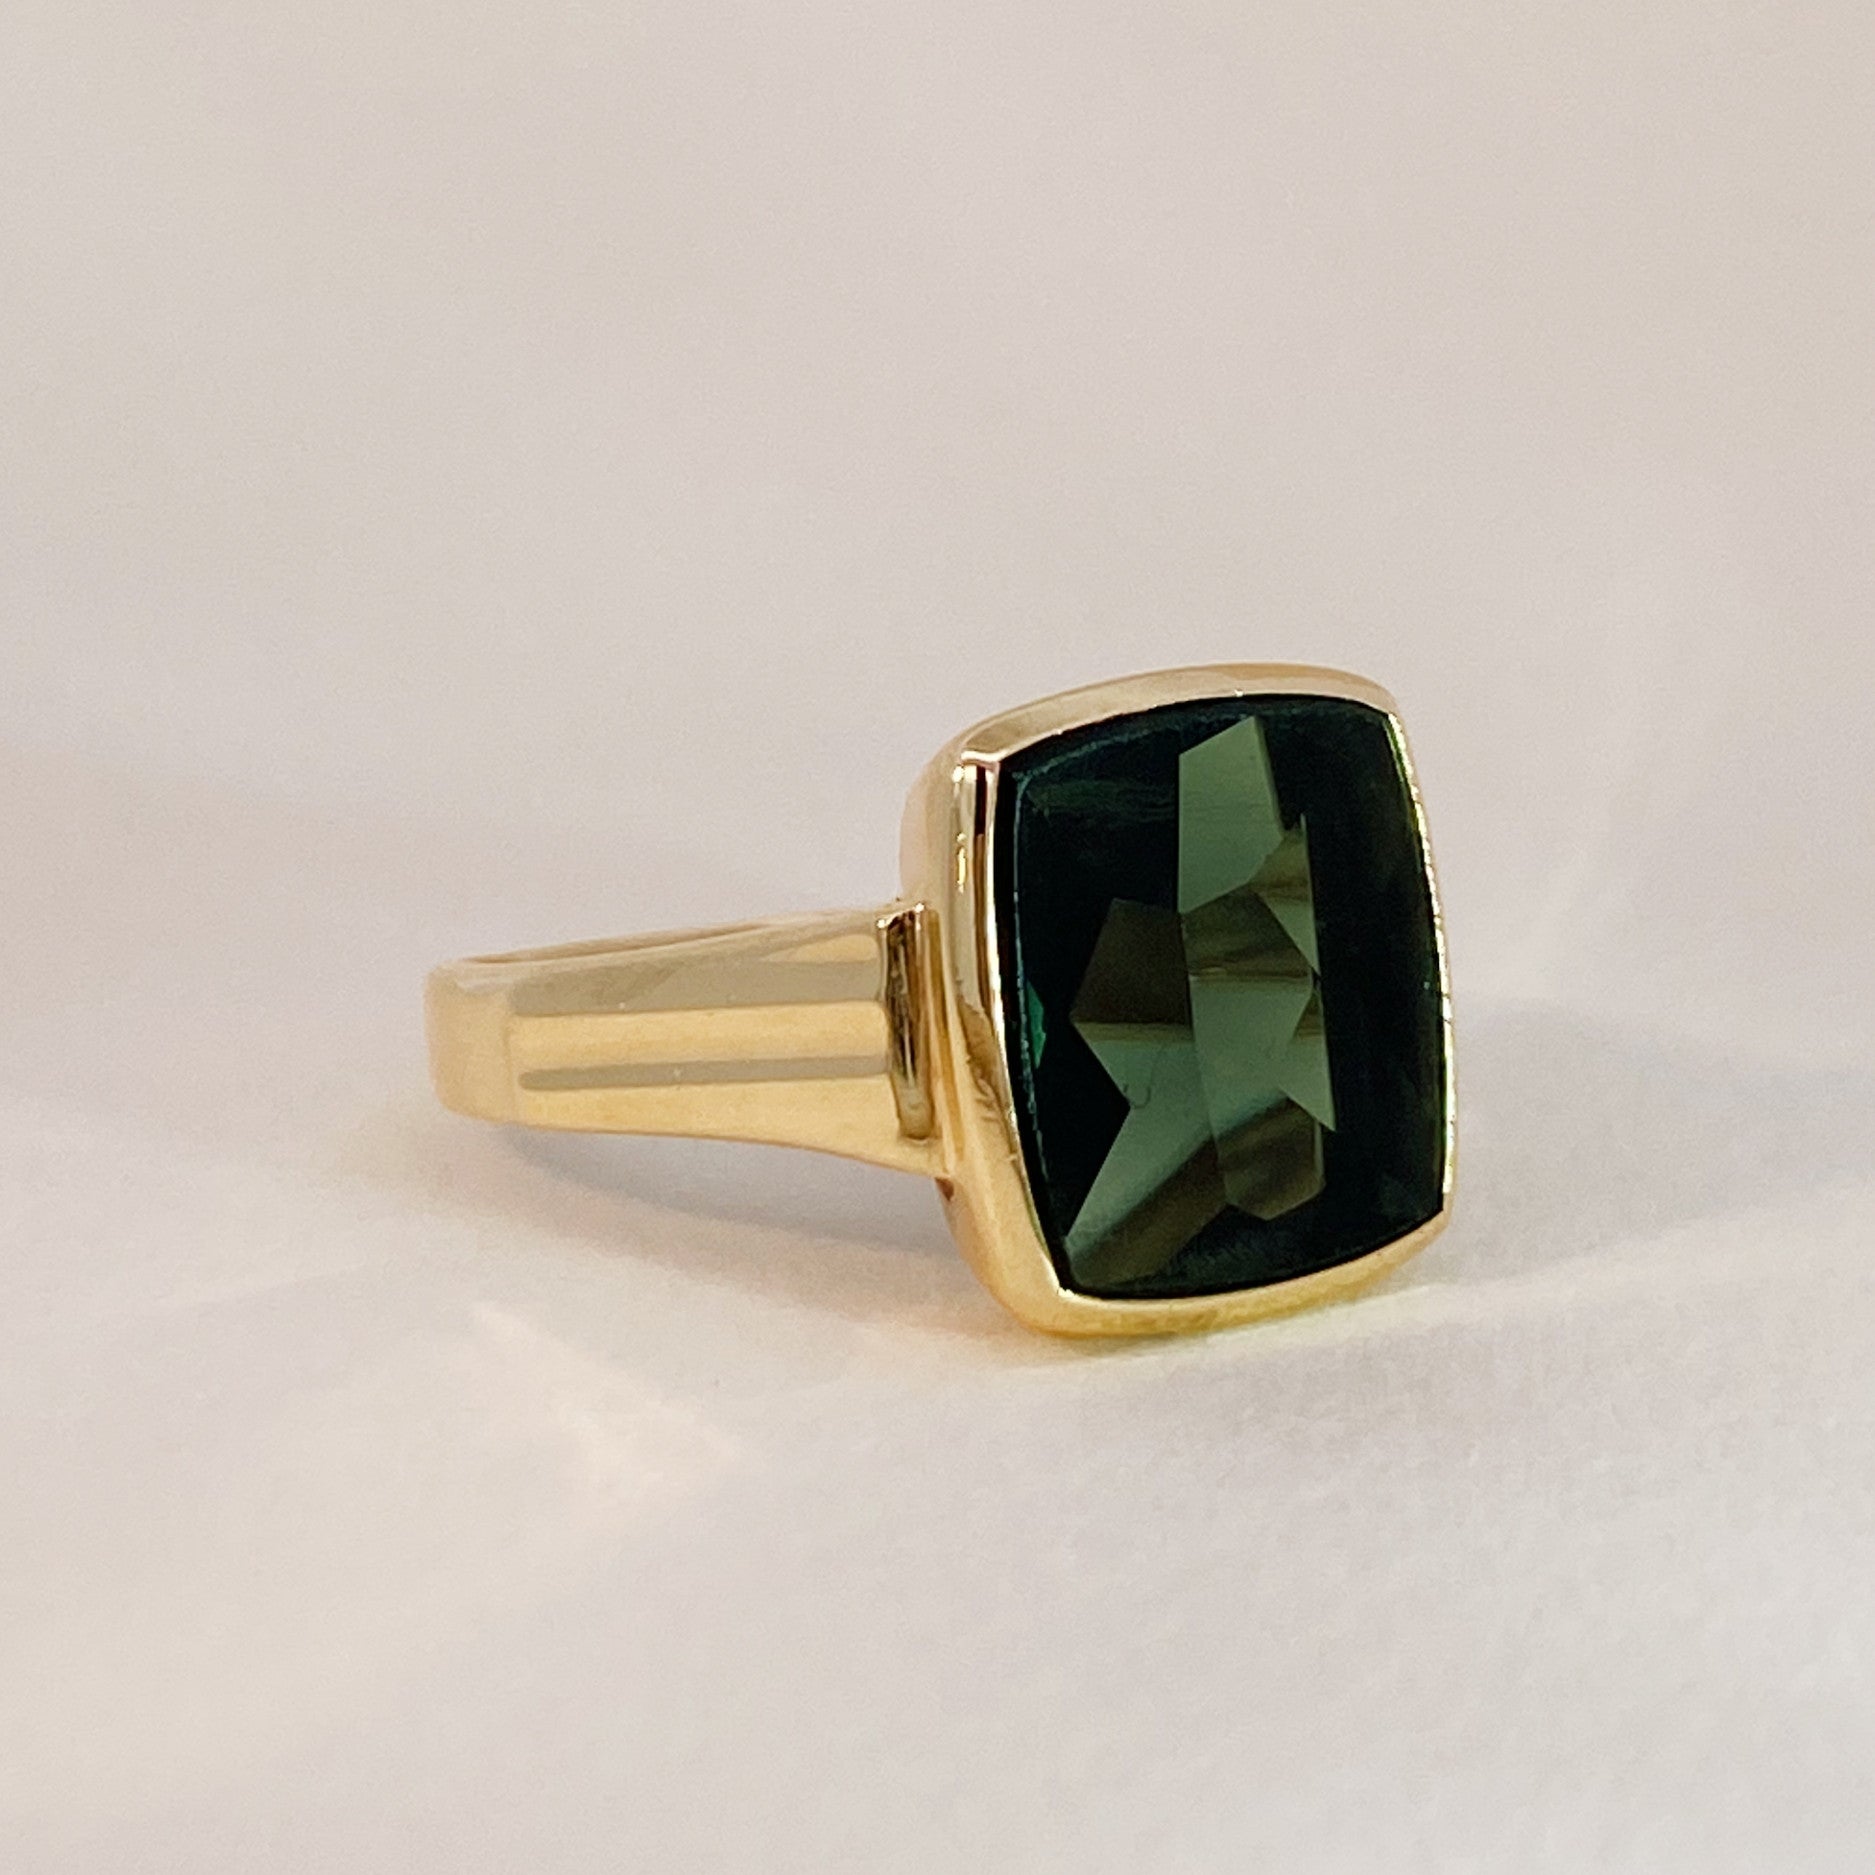 Spinel statement ring